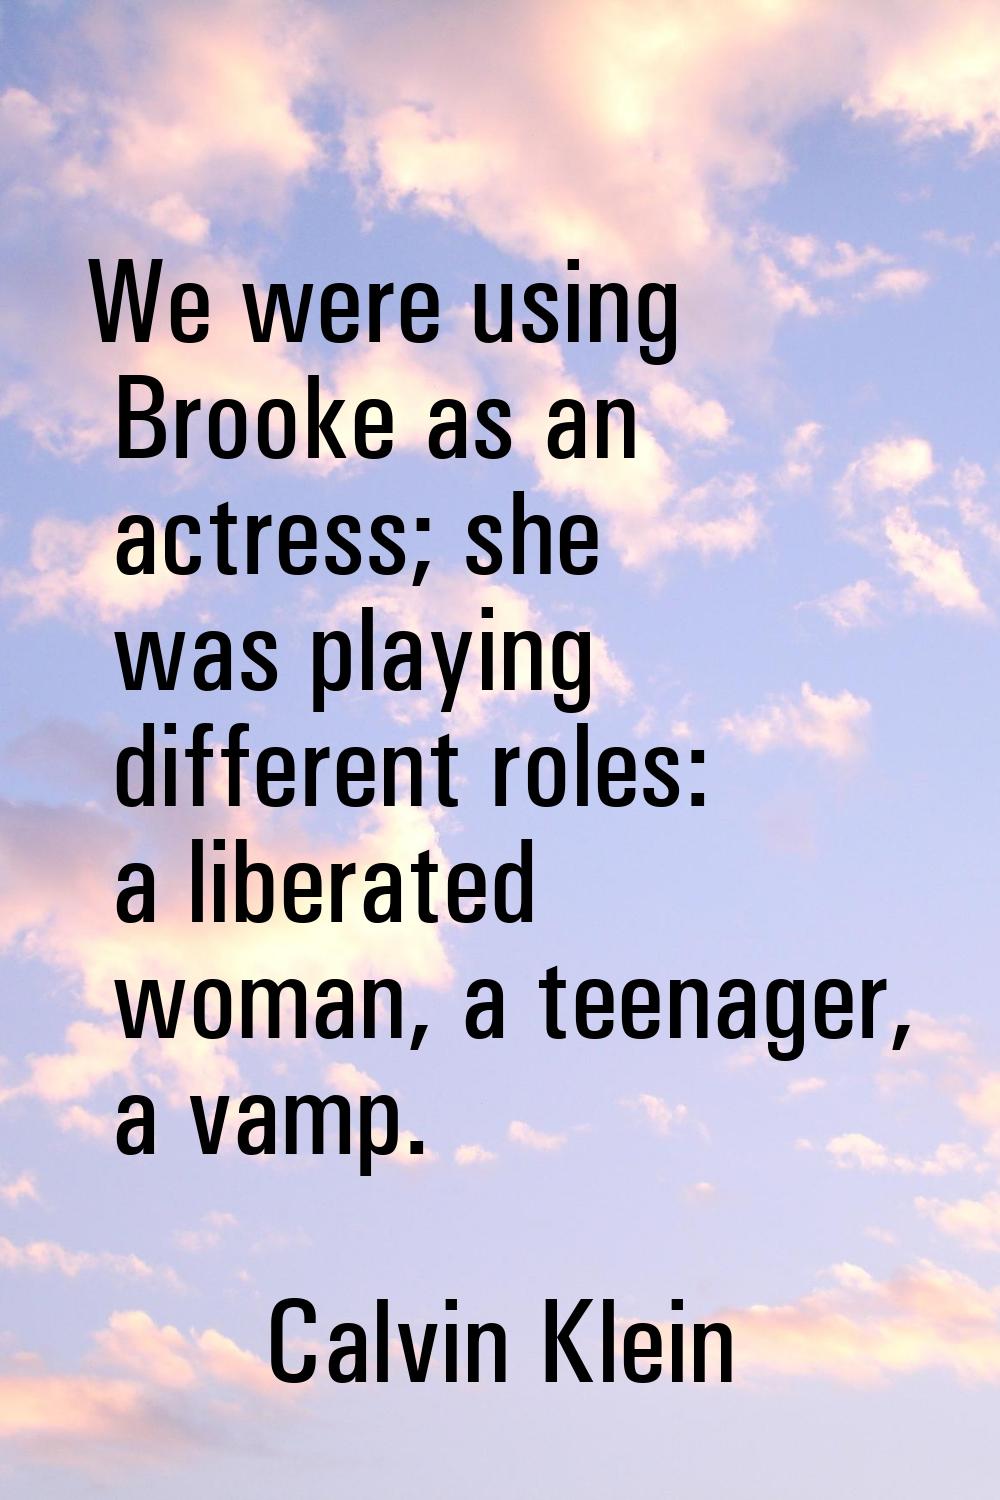 We were using Brooke as an actress; she was playing different roles: a liberated woman, a teenager,